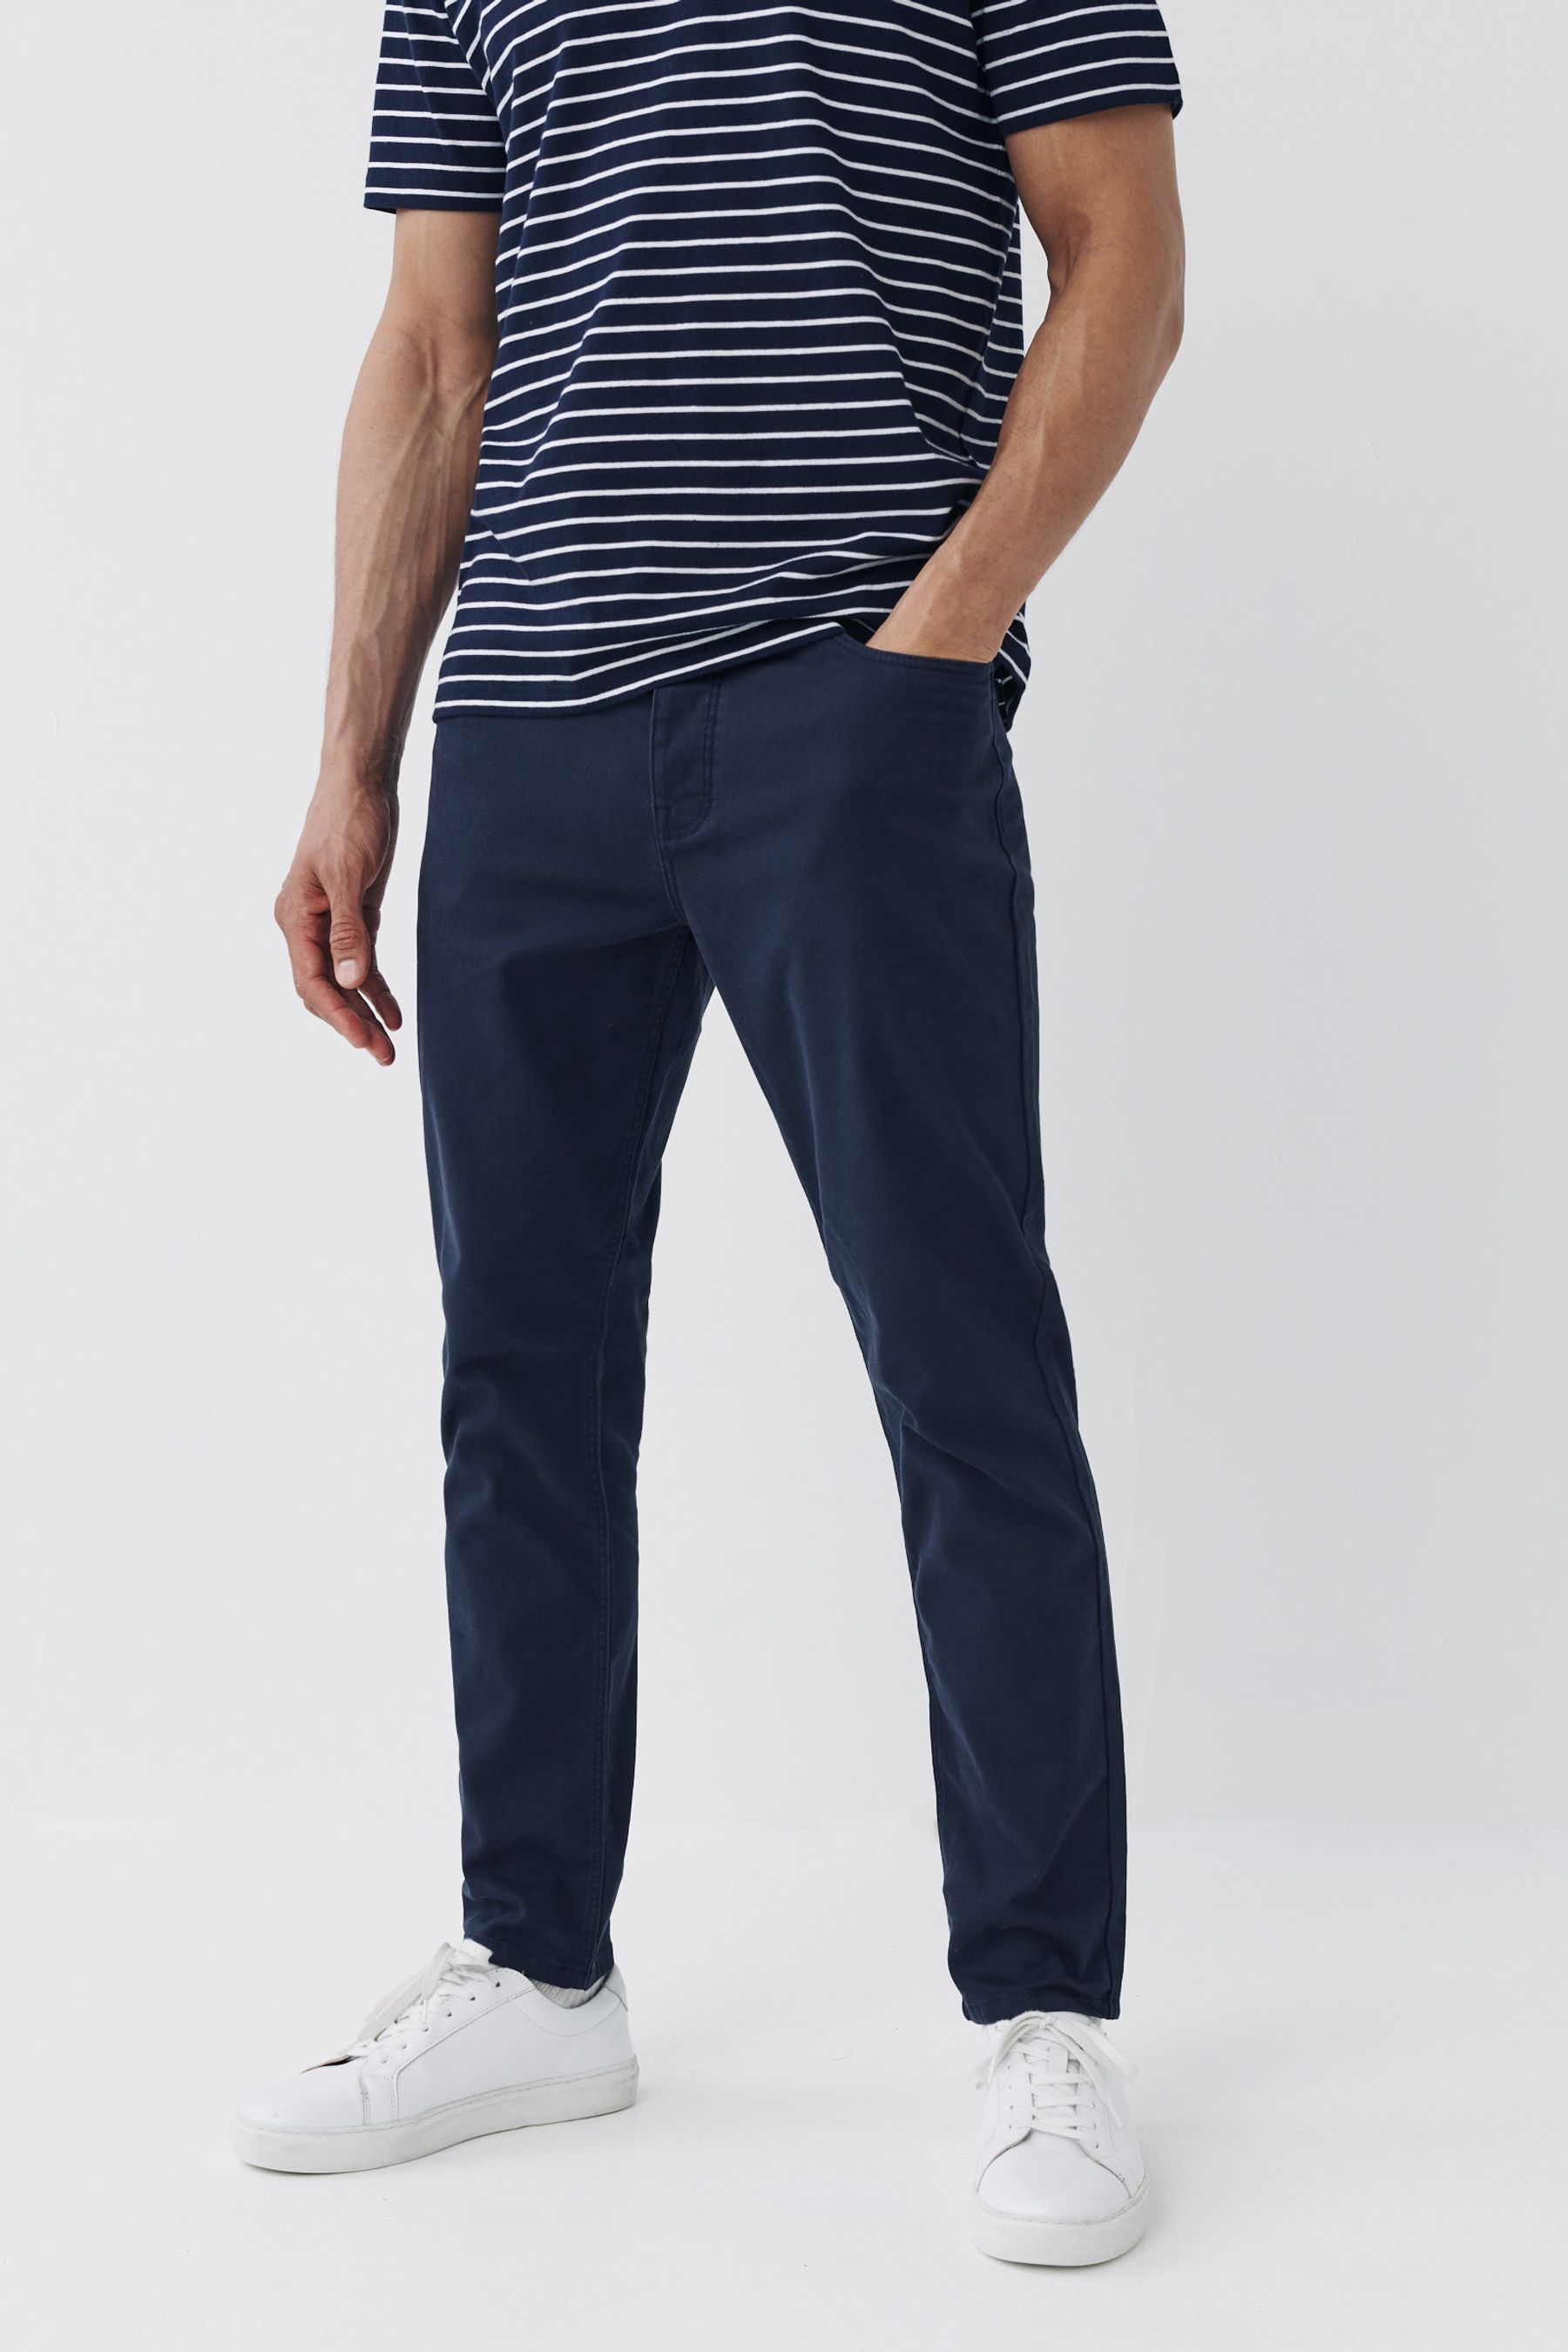 Buy Dark Blue Slim Soft Touch 5 Pocket Jean Style Trousers from the ...